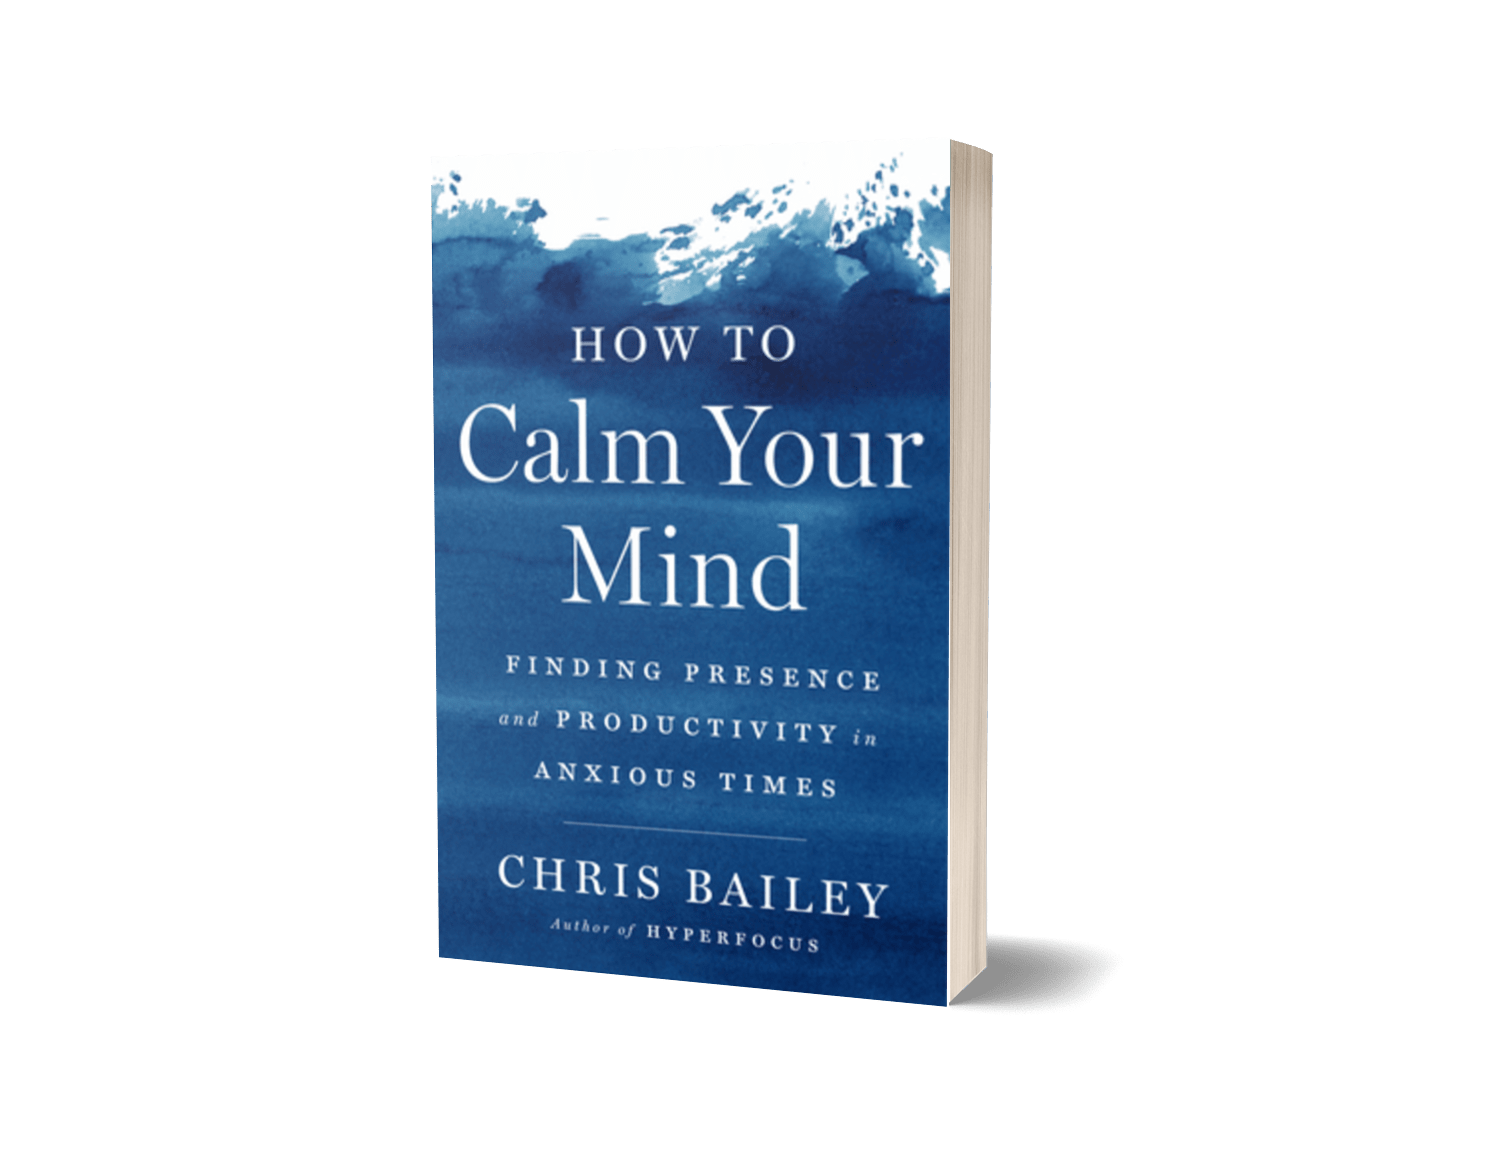 How to Calm your mind by Chris Bailey